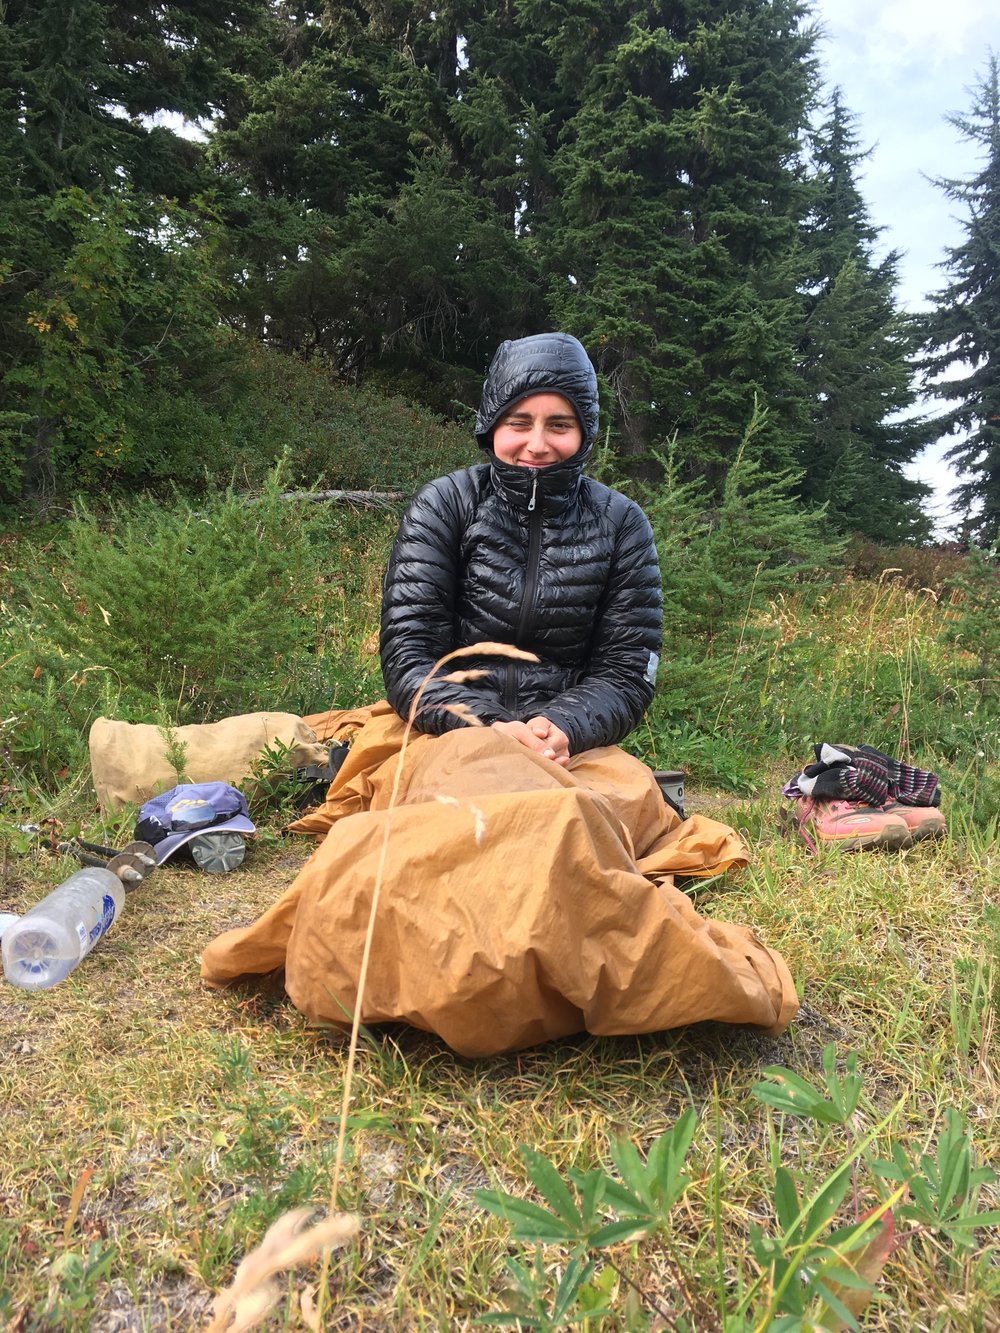 This jacket is affectionately nicknamed  “The Trashbag."  In Washington, it's perfectly acceptable to take naps at lunch and use your ground sheet as a blanket.